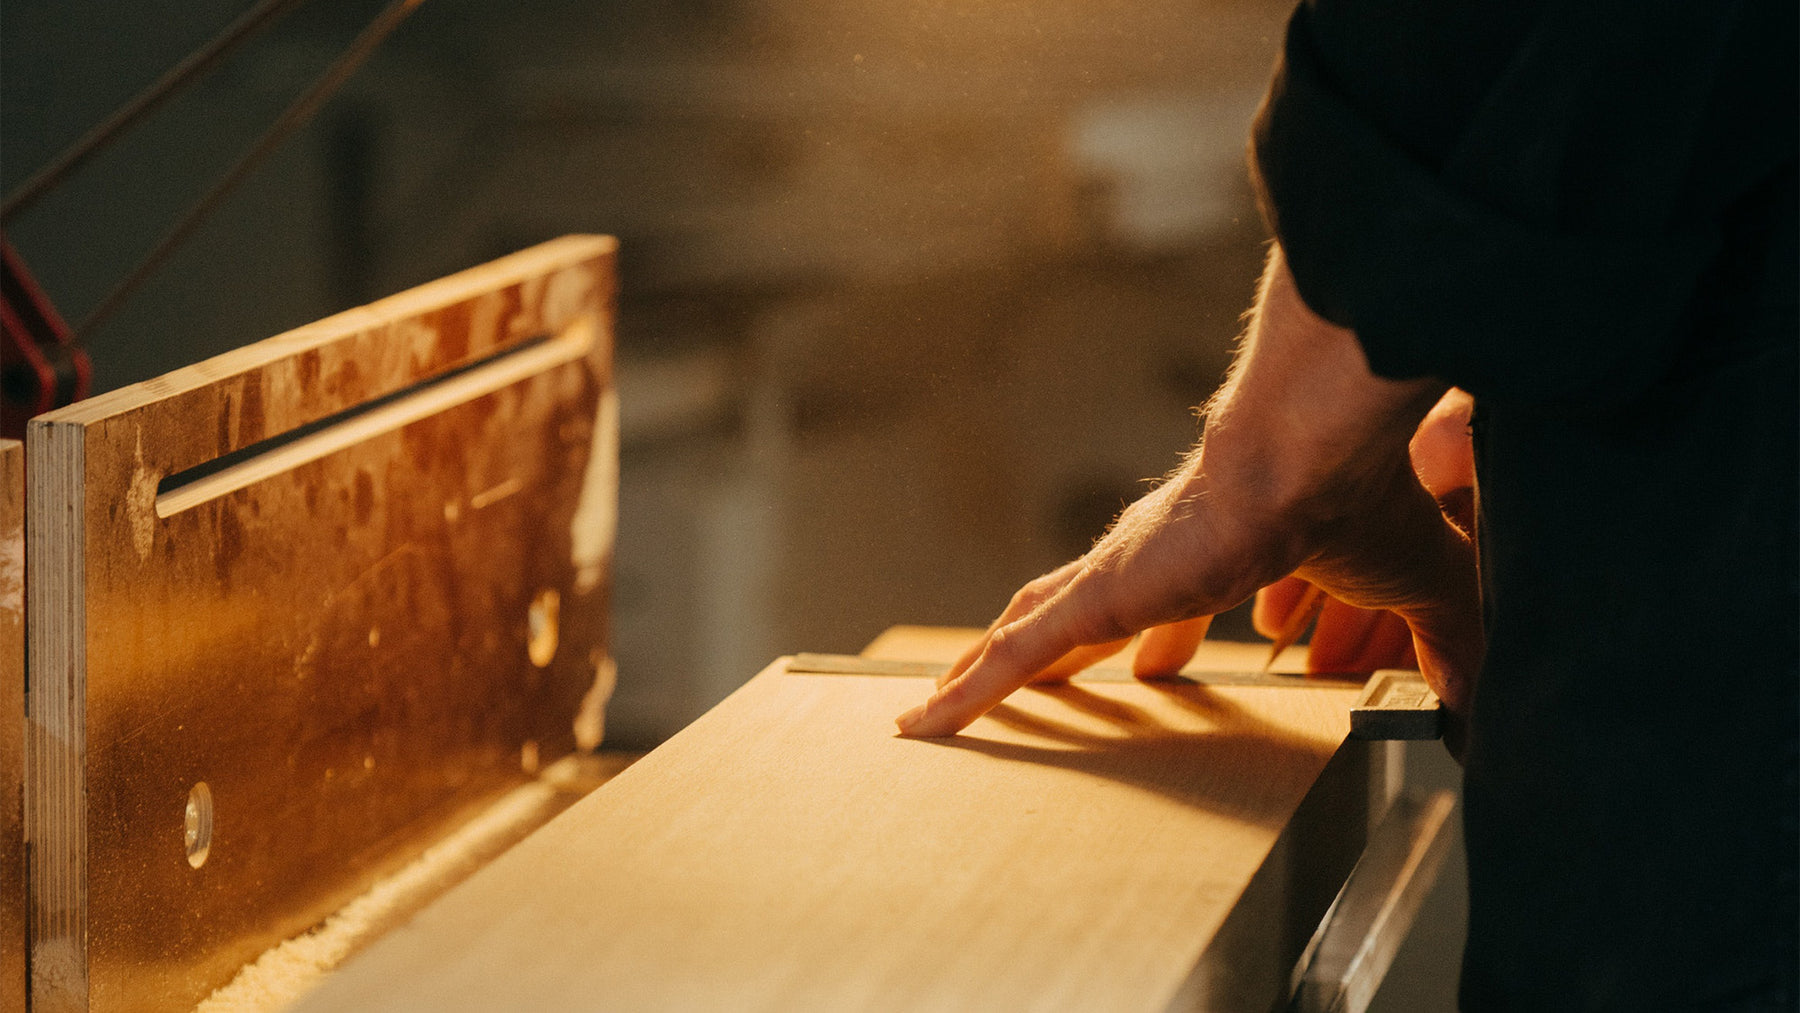 A closeup image of a man's hands measuring the width of a finished-edge slab of light colored wood on top of a work bench. He is using a small ruler and marking the wood with a pencil. The image has a warm tone and sawdust can be seen floating in the air. 